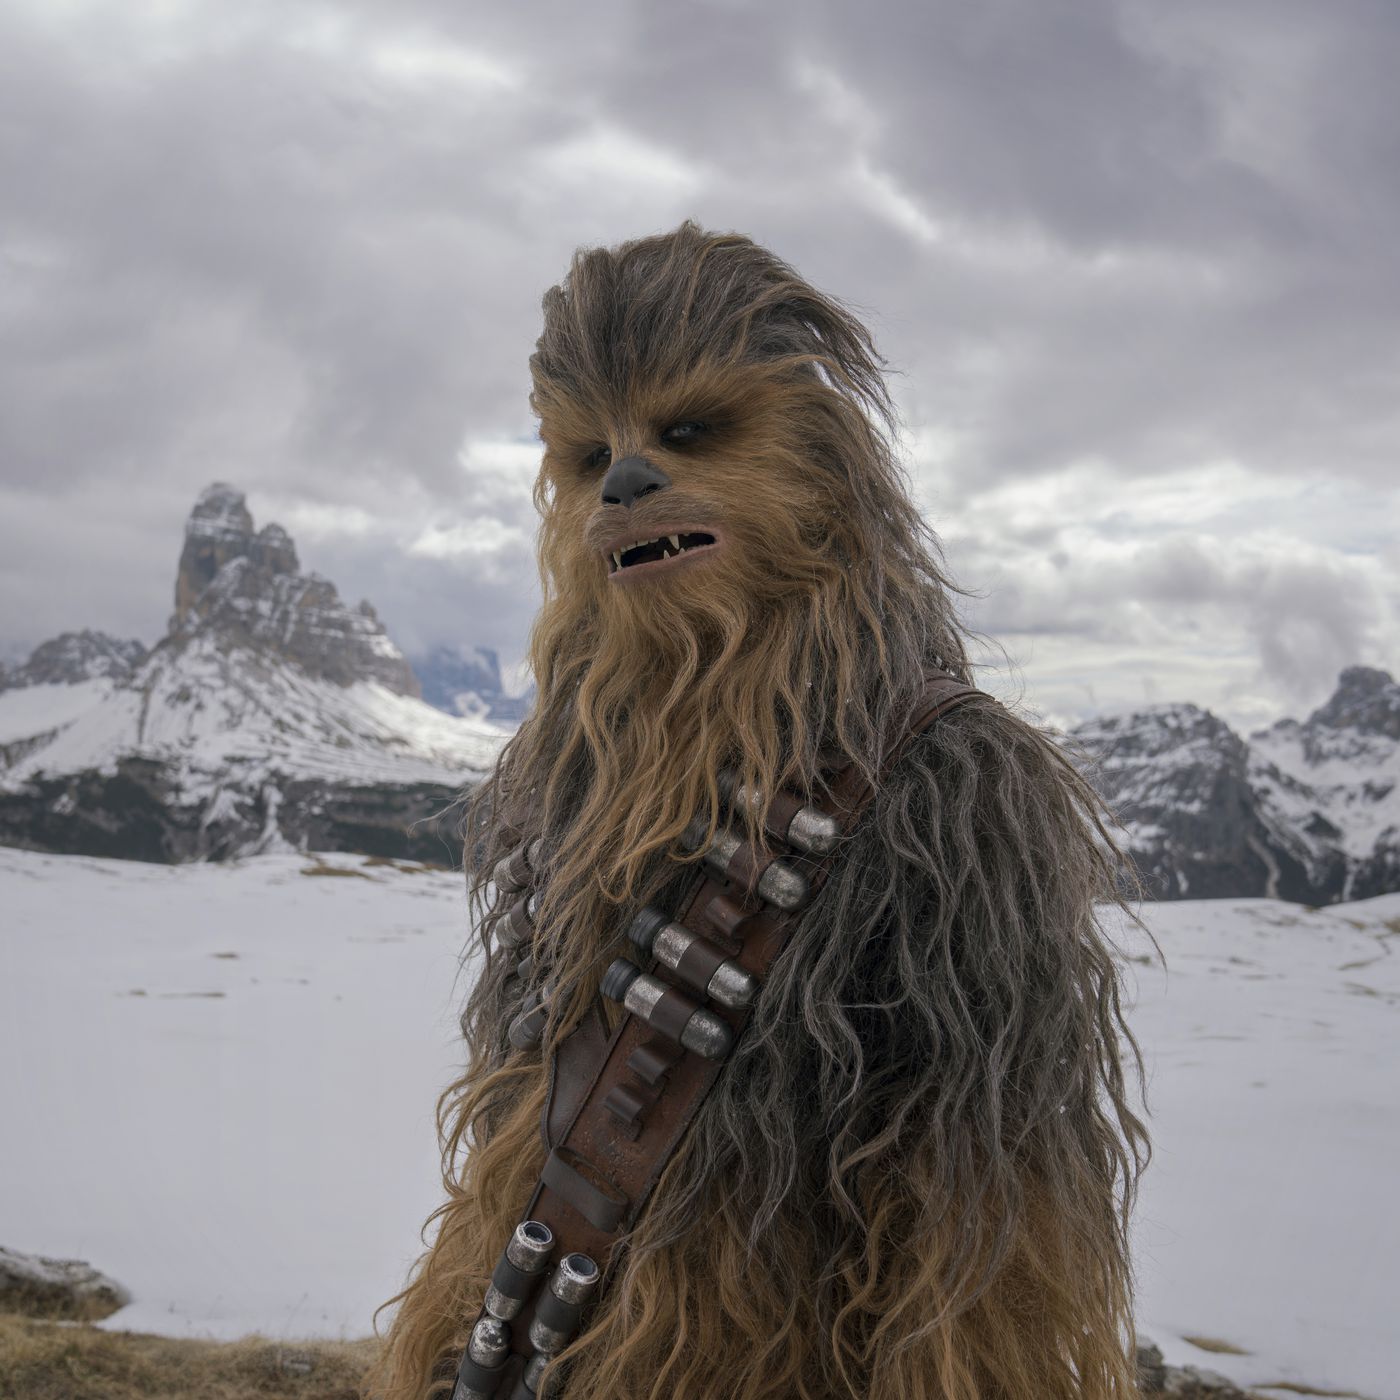 Best of Pictures of chewy from star wars